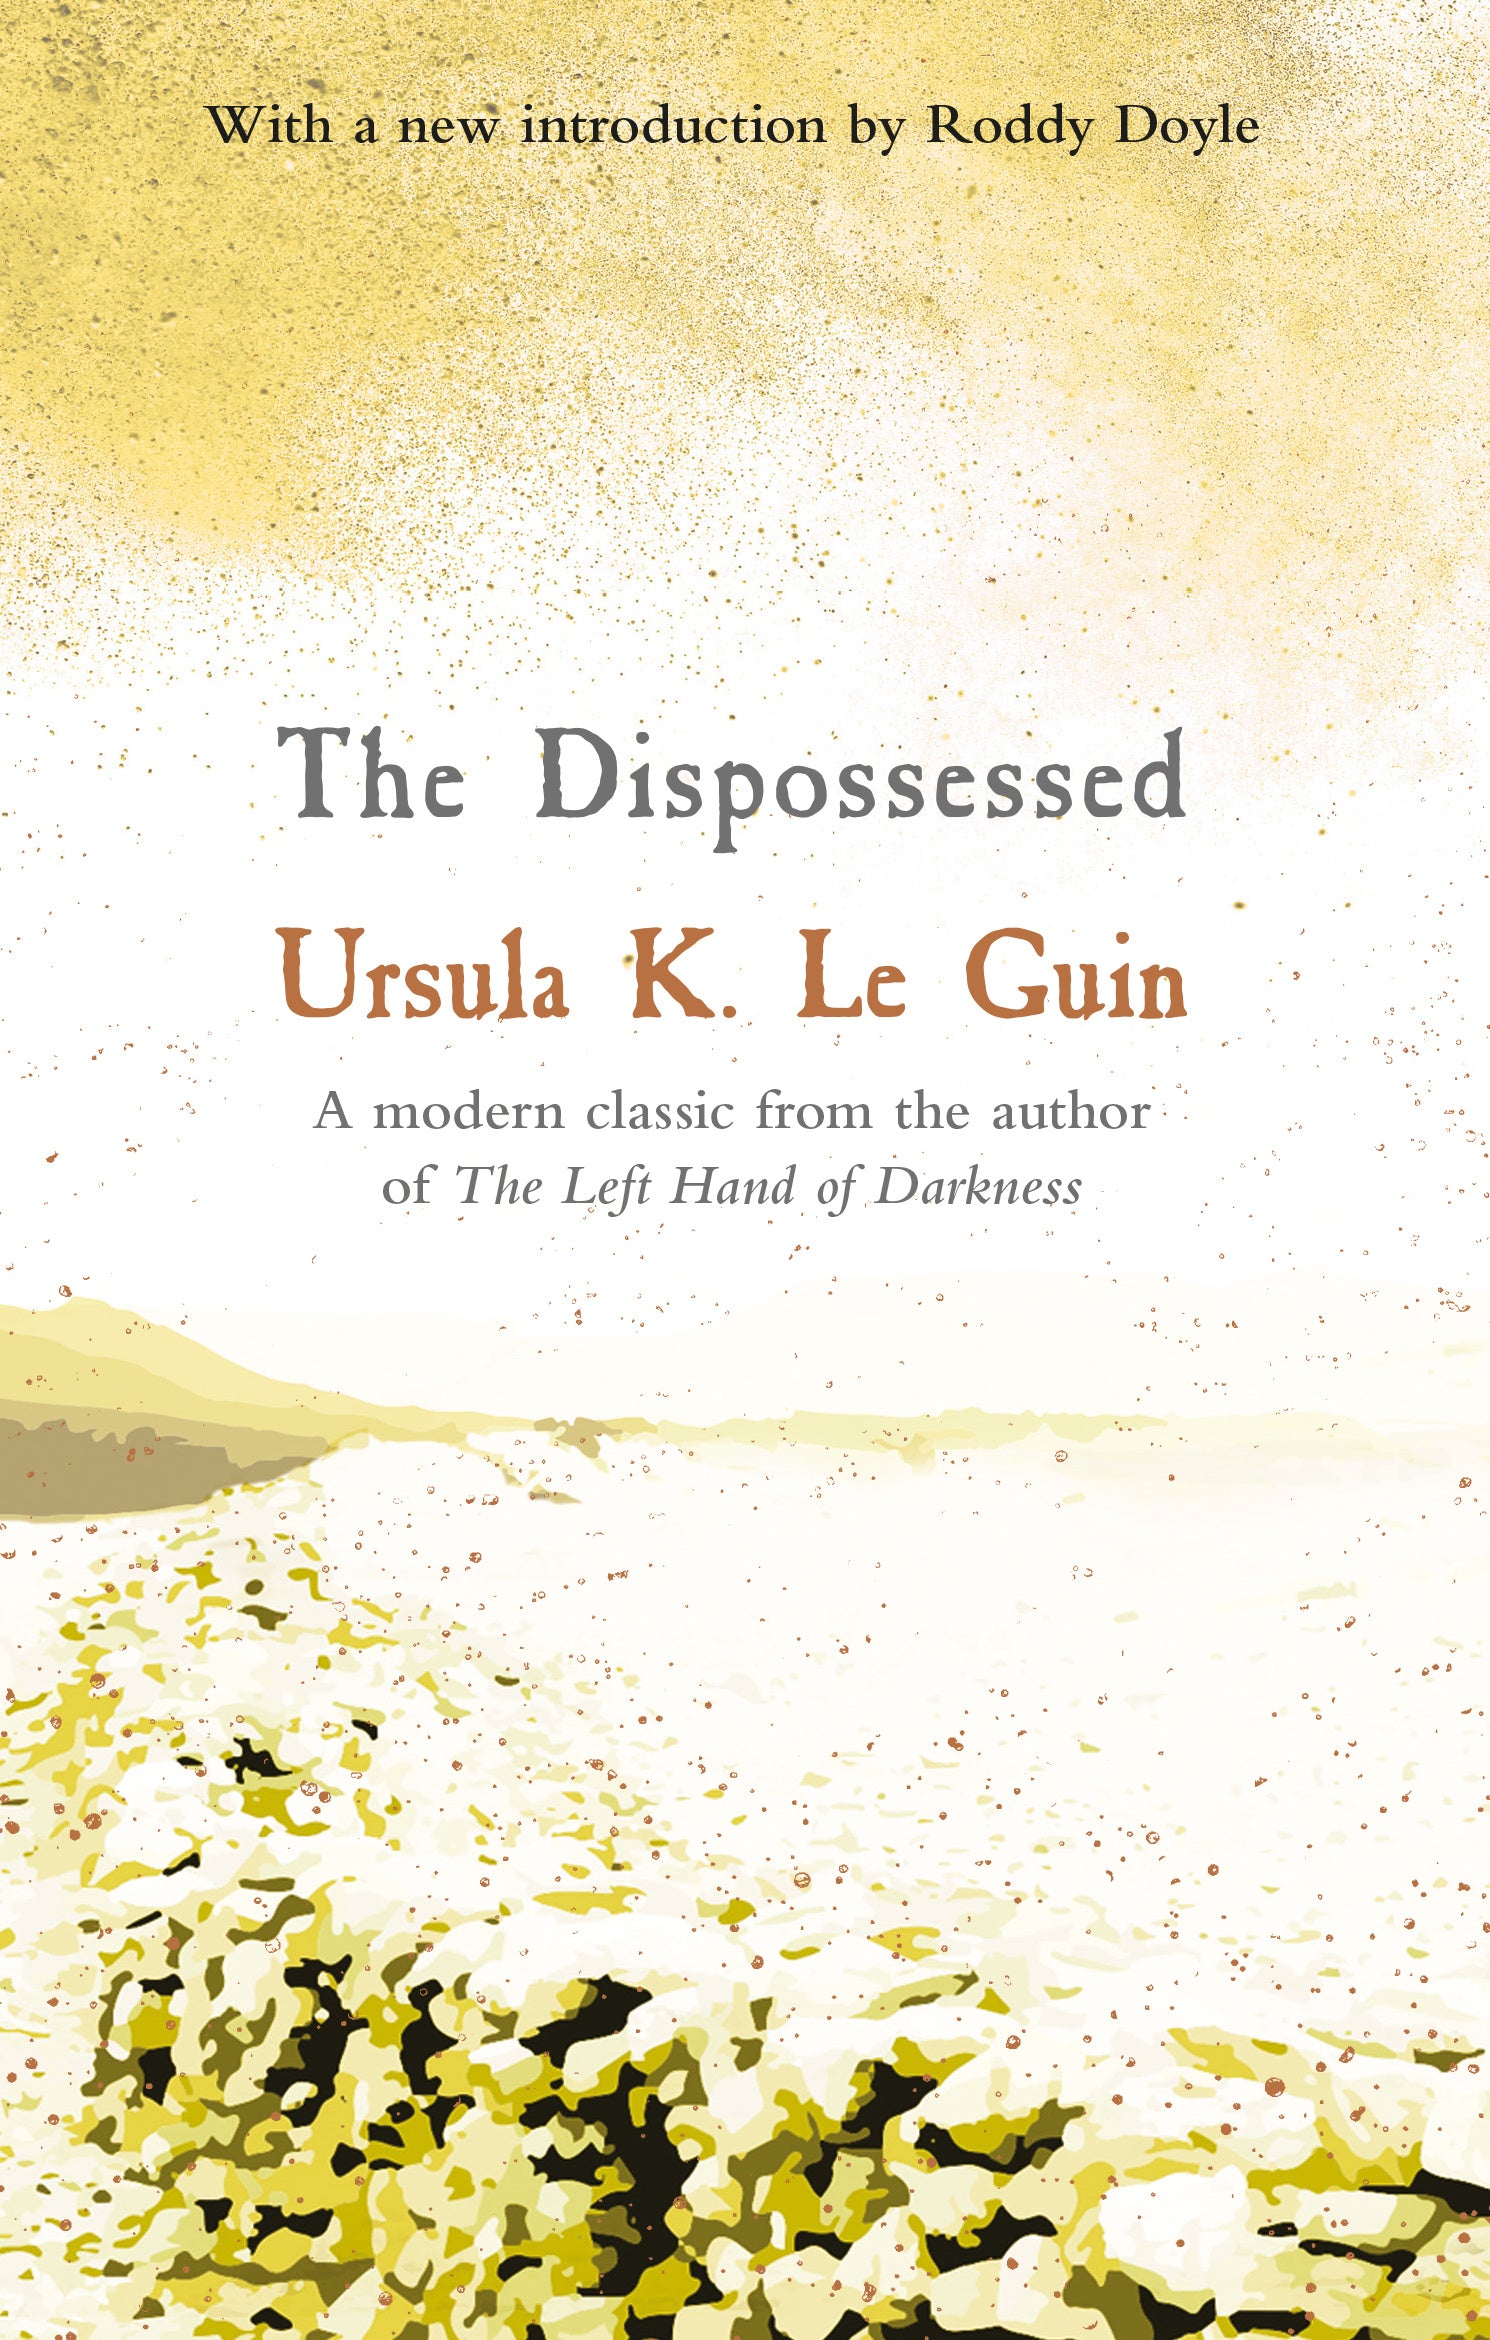 The Dispossessed by Ursula Le Guin